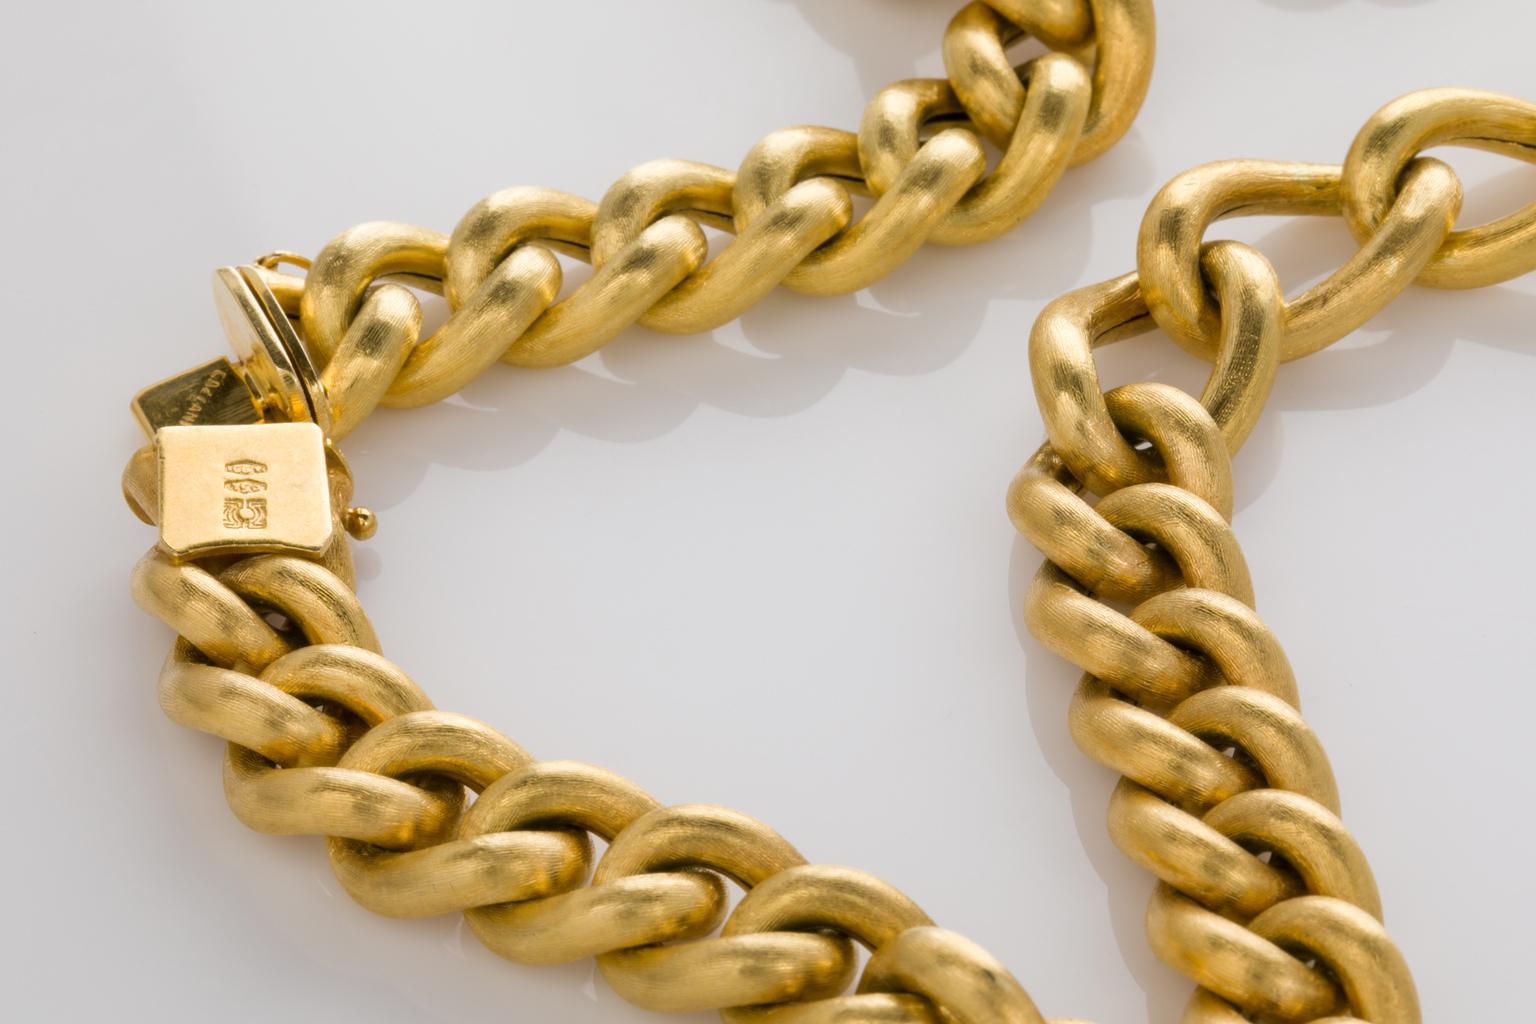 A fabulous gold link chain necklace with a combination of shorter and longer curb links. It's a big and bold look on the neckline and can be worn layered with other chains. Each link has a subtle brushed/satin look showing wonderful craftsmanship.